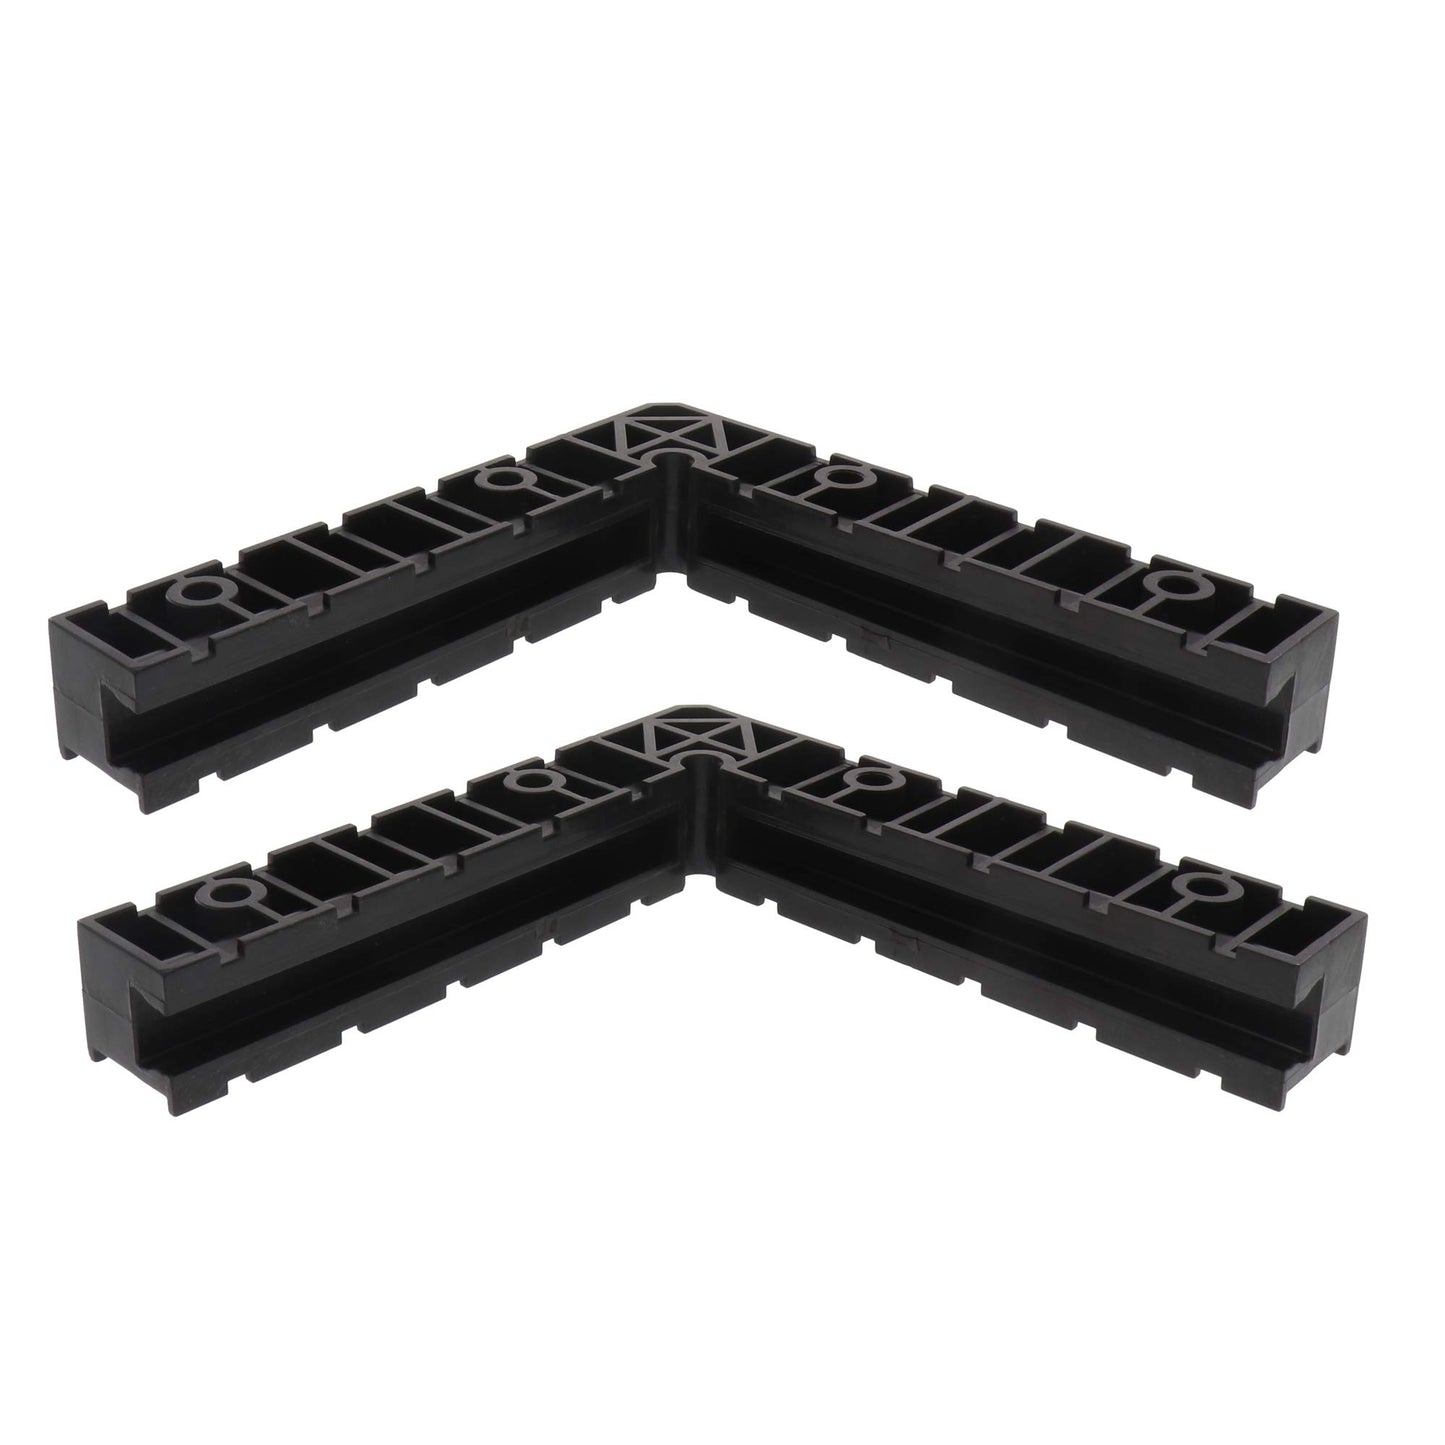 Milescraft 4011 8" ClampSquares - 90 Degree Corner Clamp, Positioning/Assembly Squares for Pictures Frames, Boxes, Etc Black